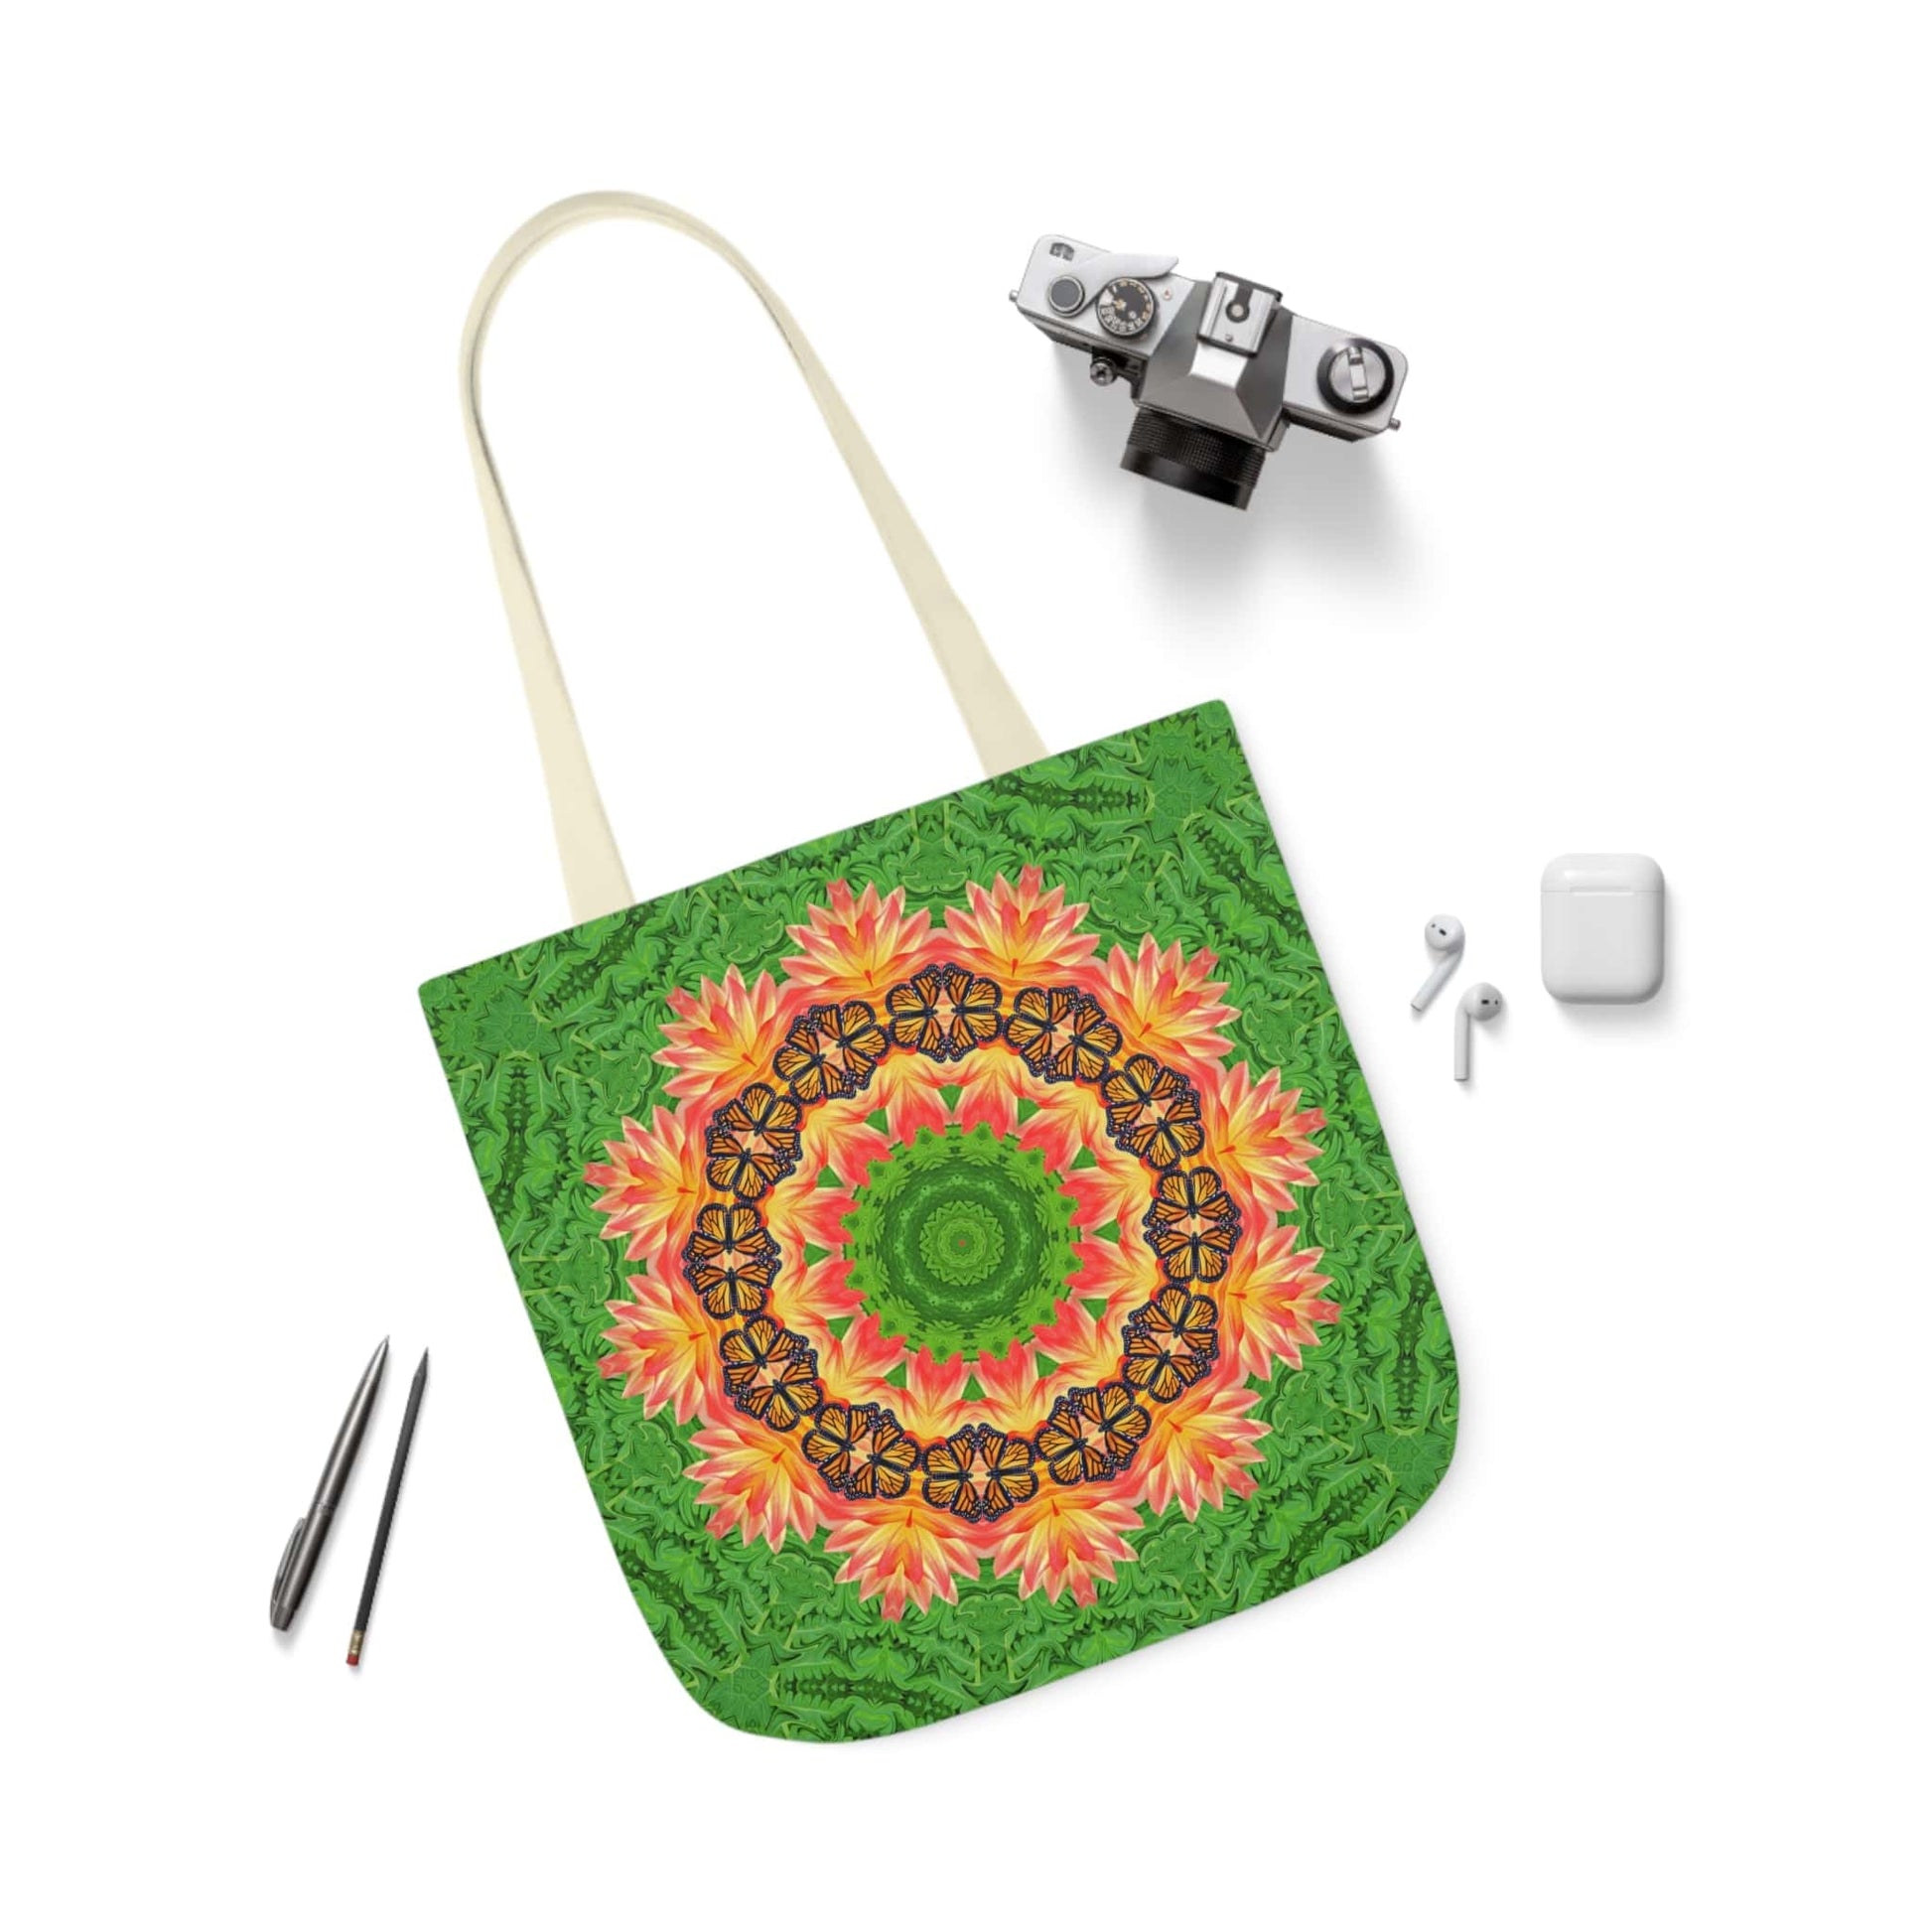 Monarch Butterfly Floral Mandala Tote Bag - Cute and Practical Everyday Accessory beige handle